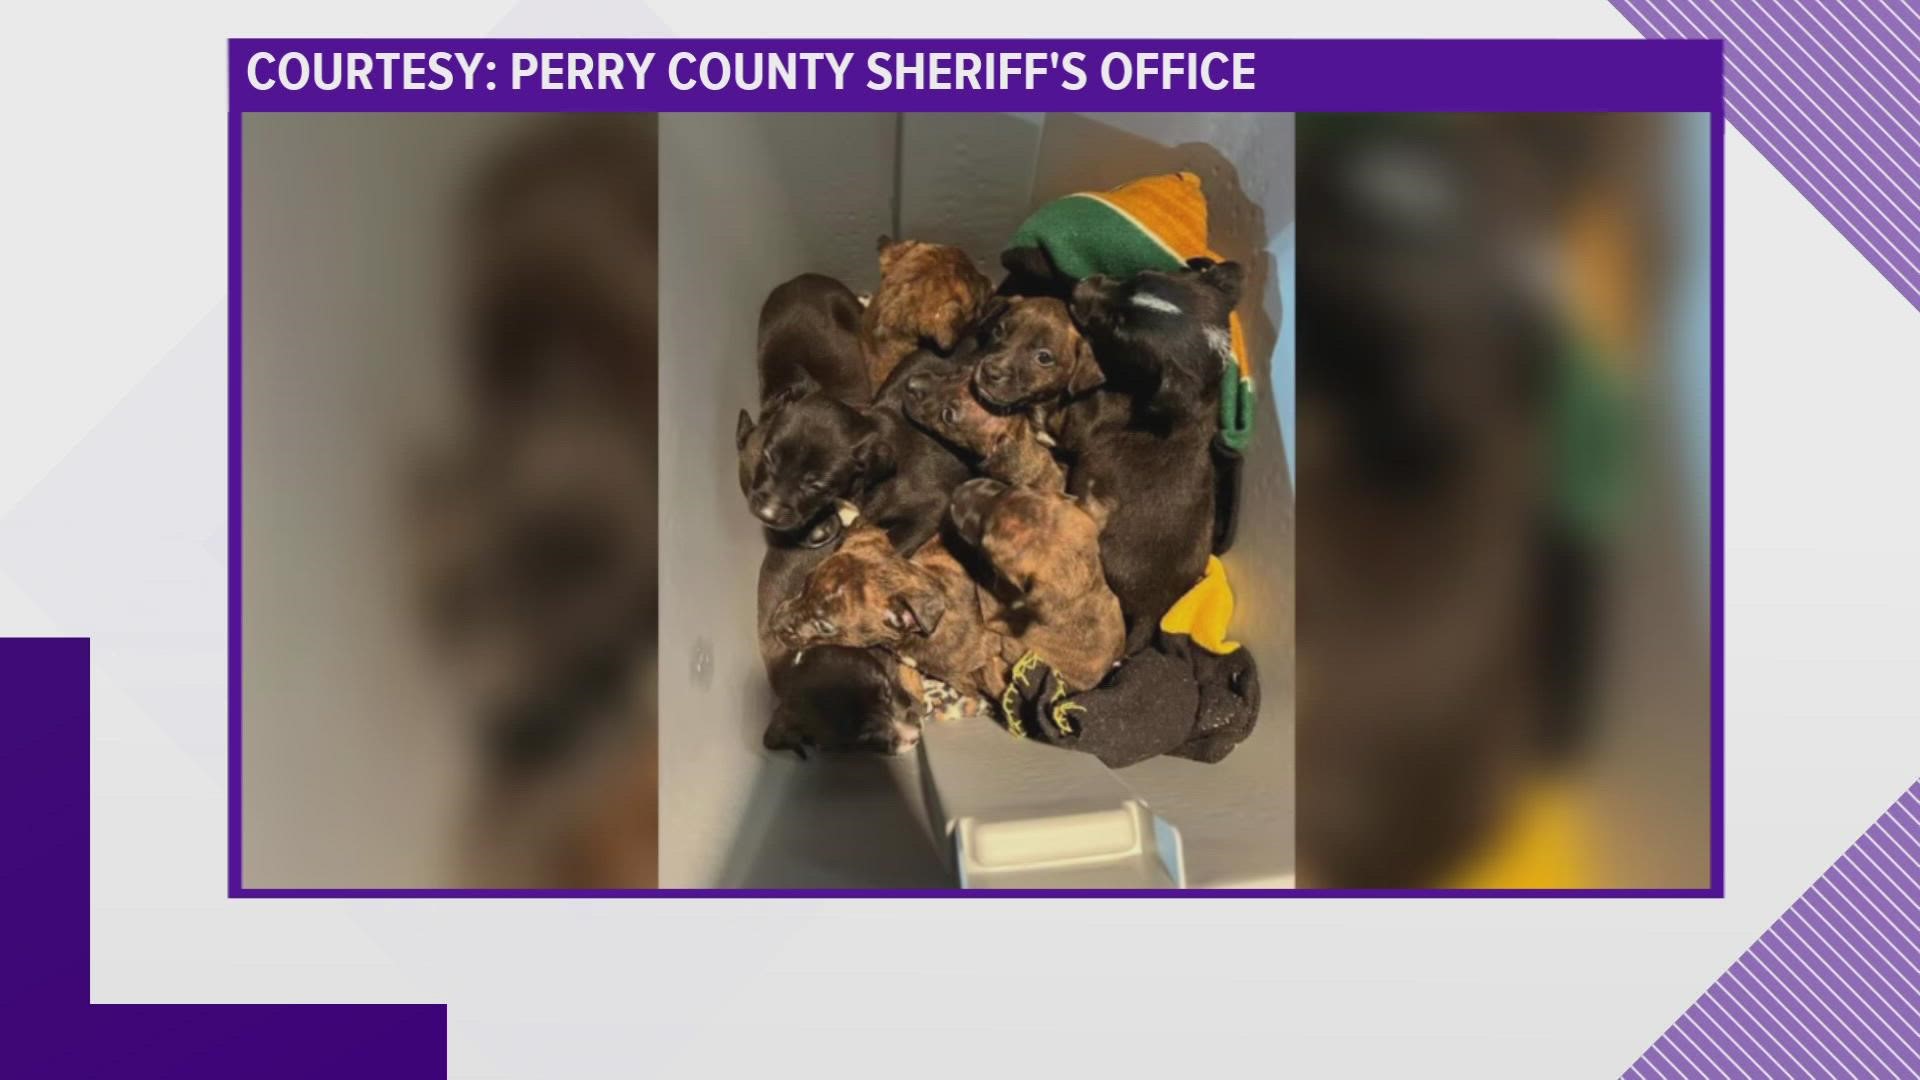 Nine puppies were found abandoned inside a cooler Saturday evening. According to the Perry County sheriff, a community member heard the cries from behind a dumpster.